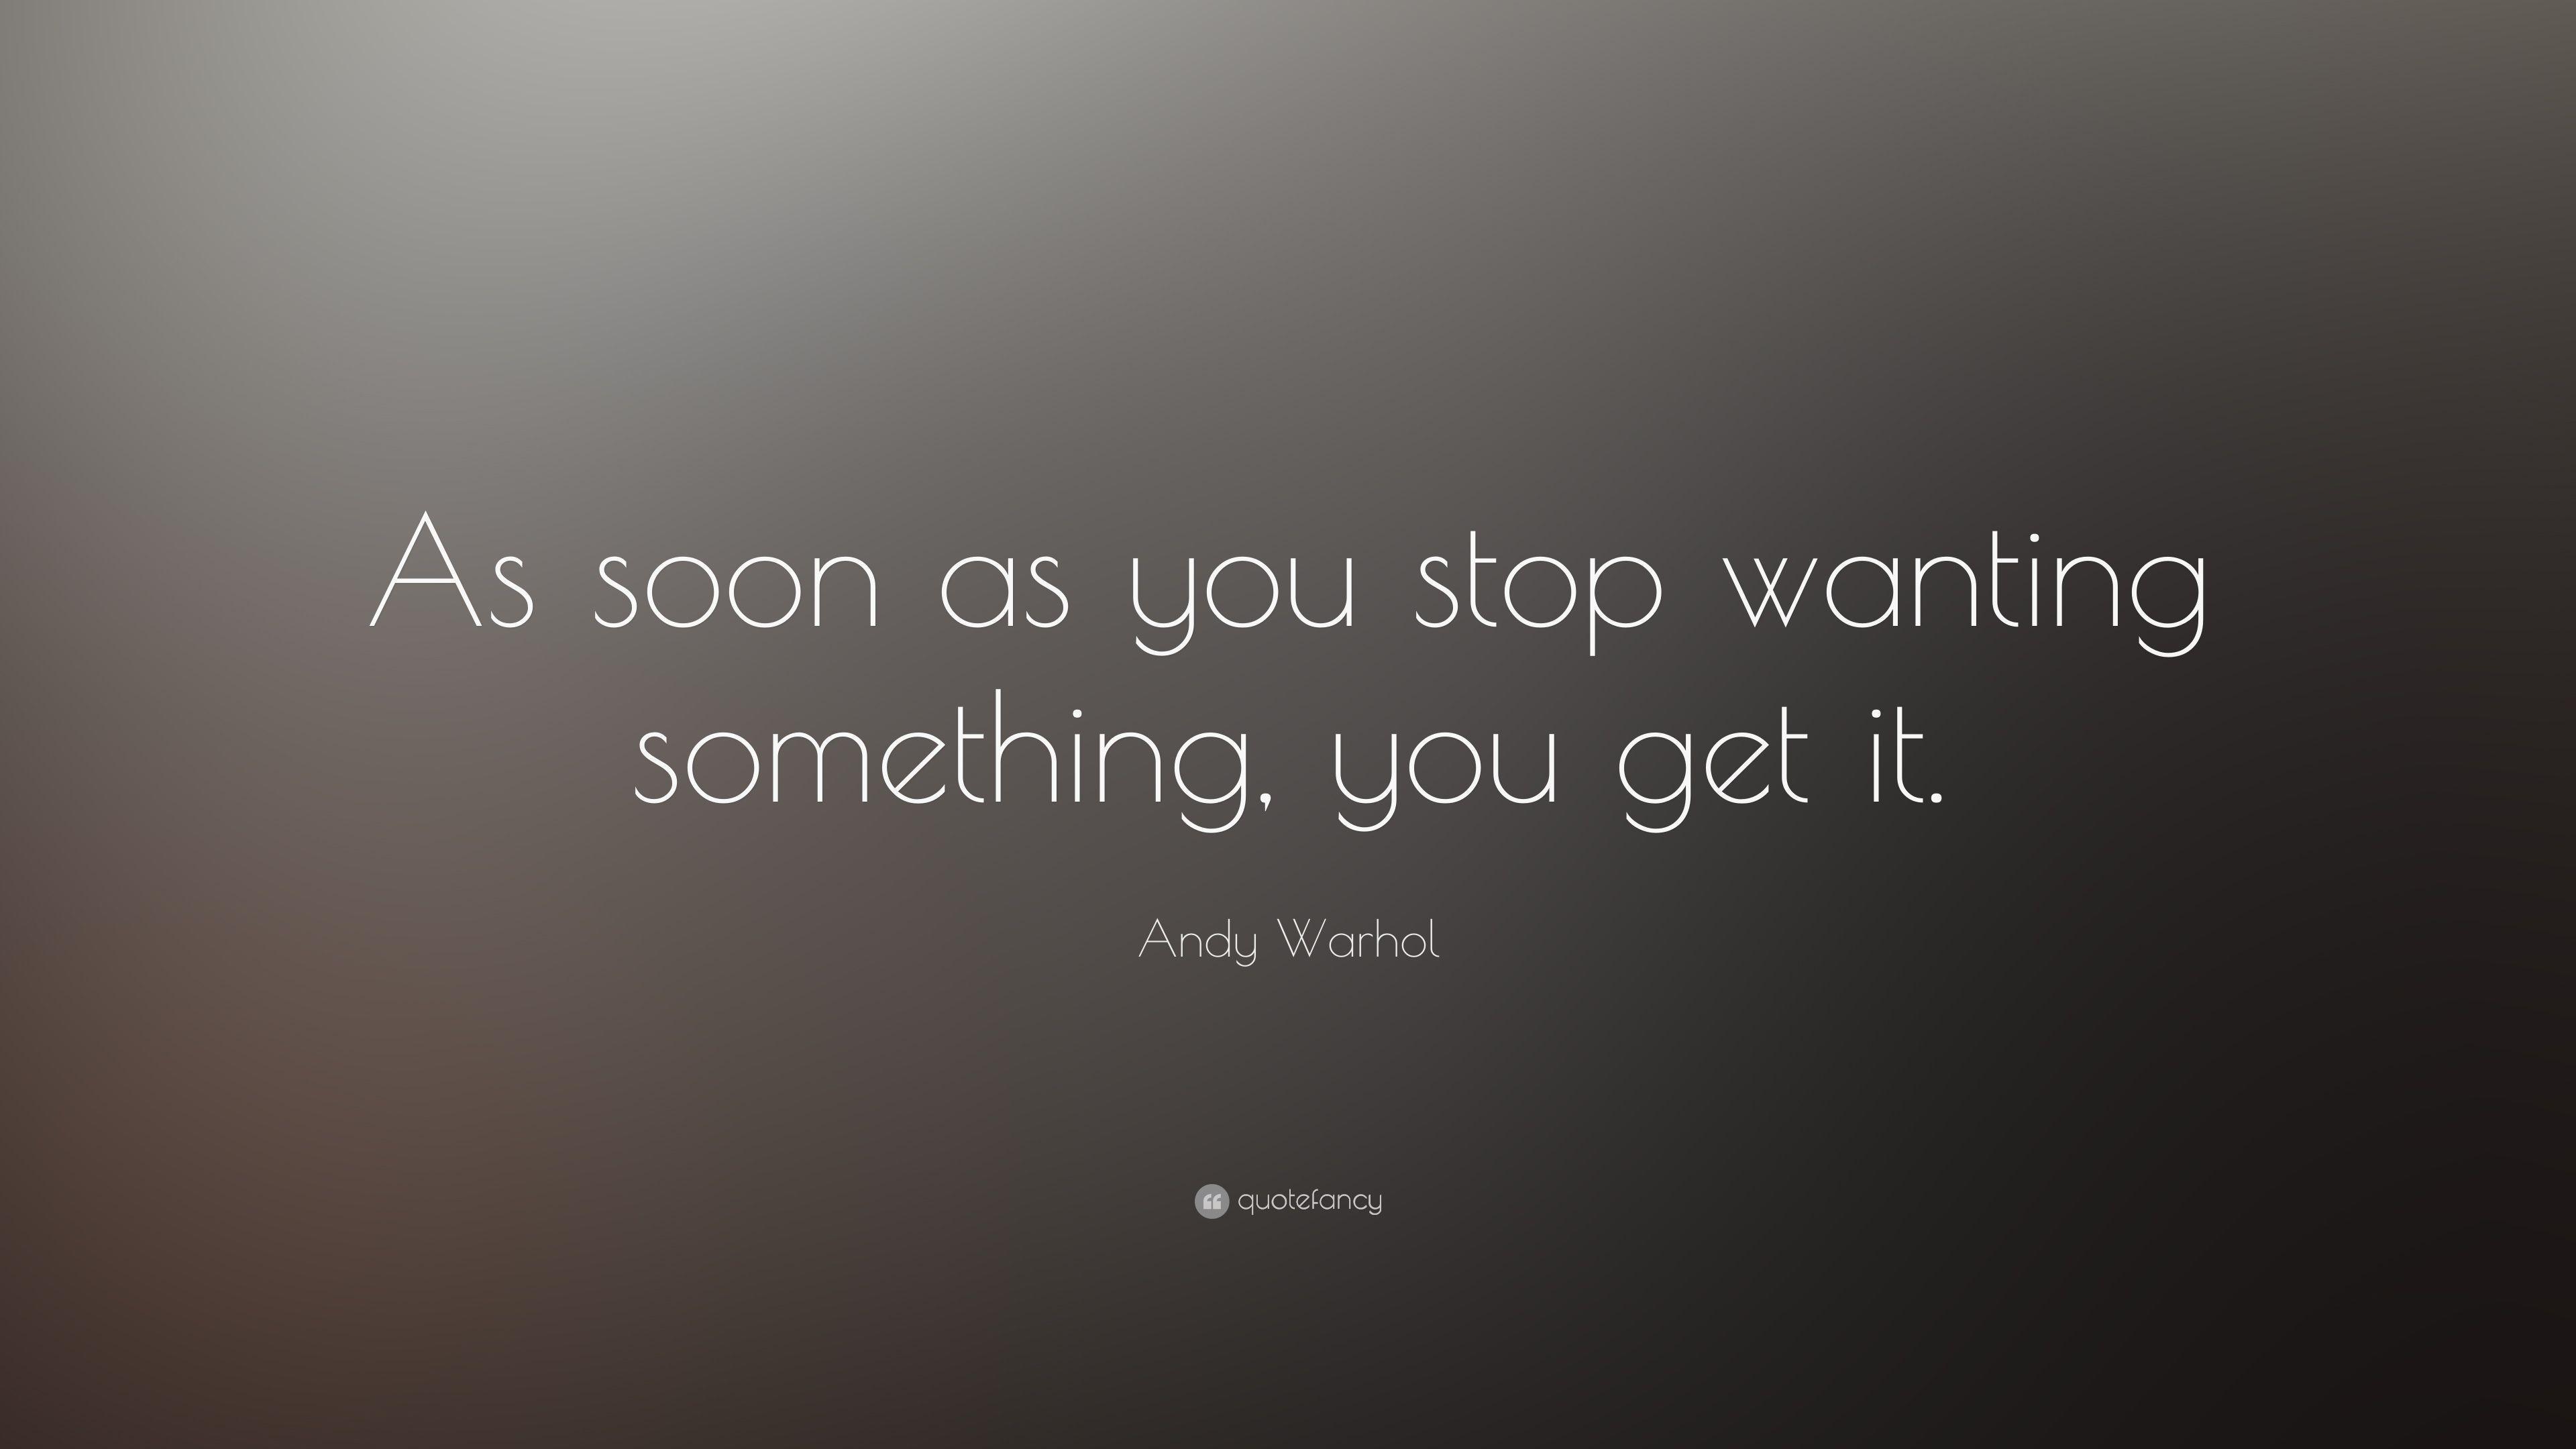 Andy Warhol Quote: “As soon as you stop wanting something, you get